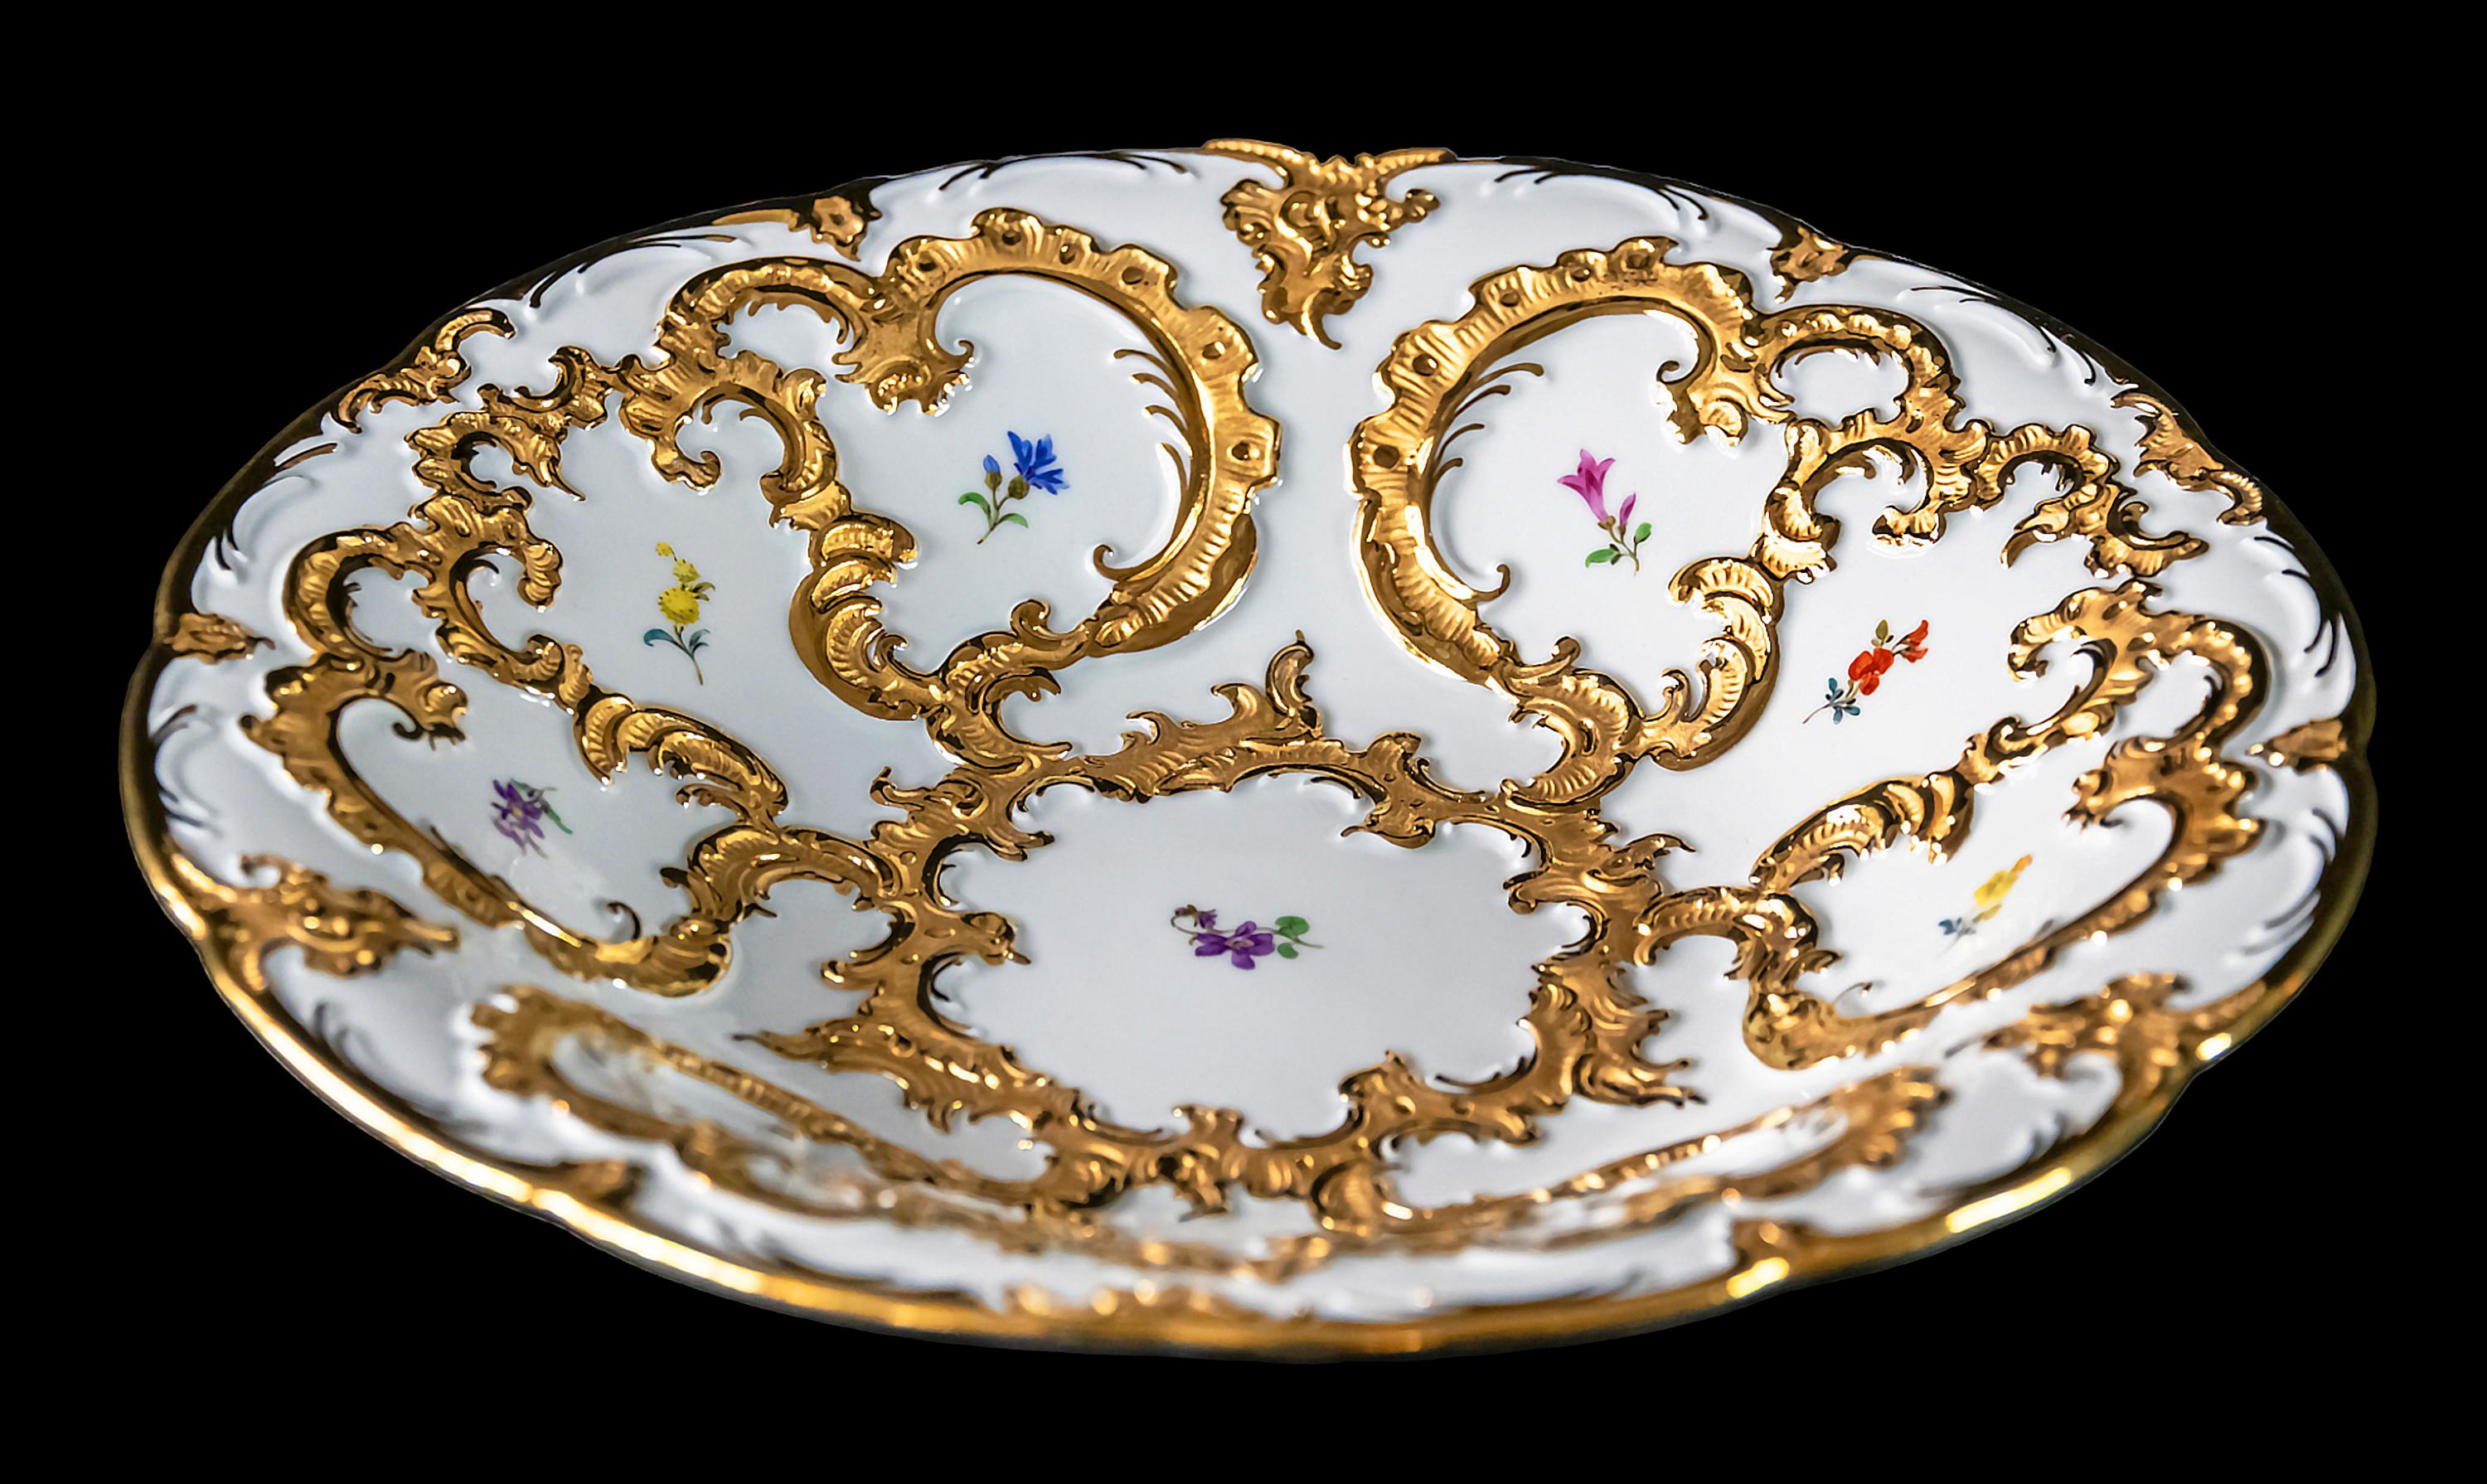 German Meissen porcelain plate richly decorated with gold and hand painted floral decor.